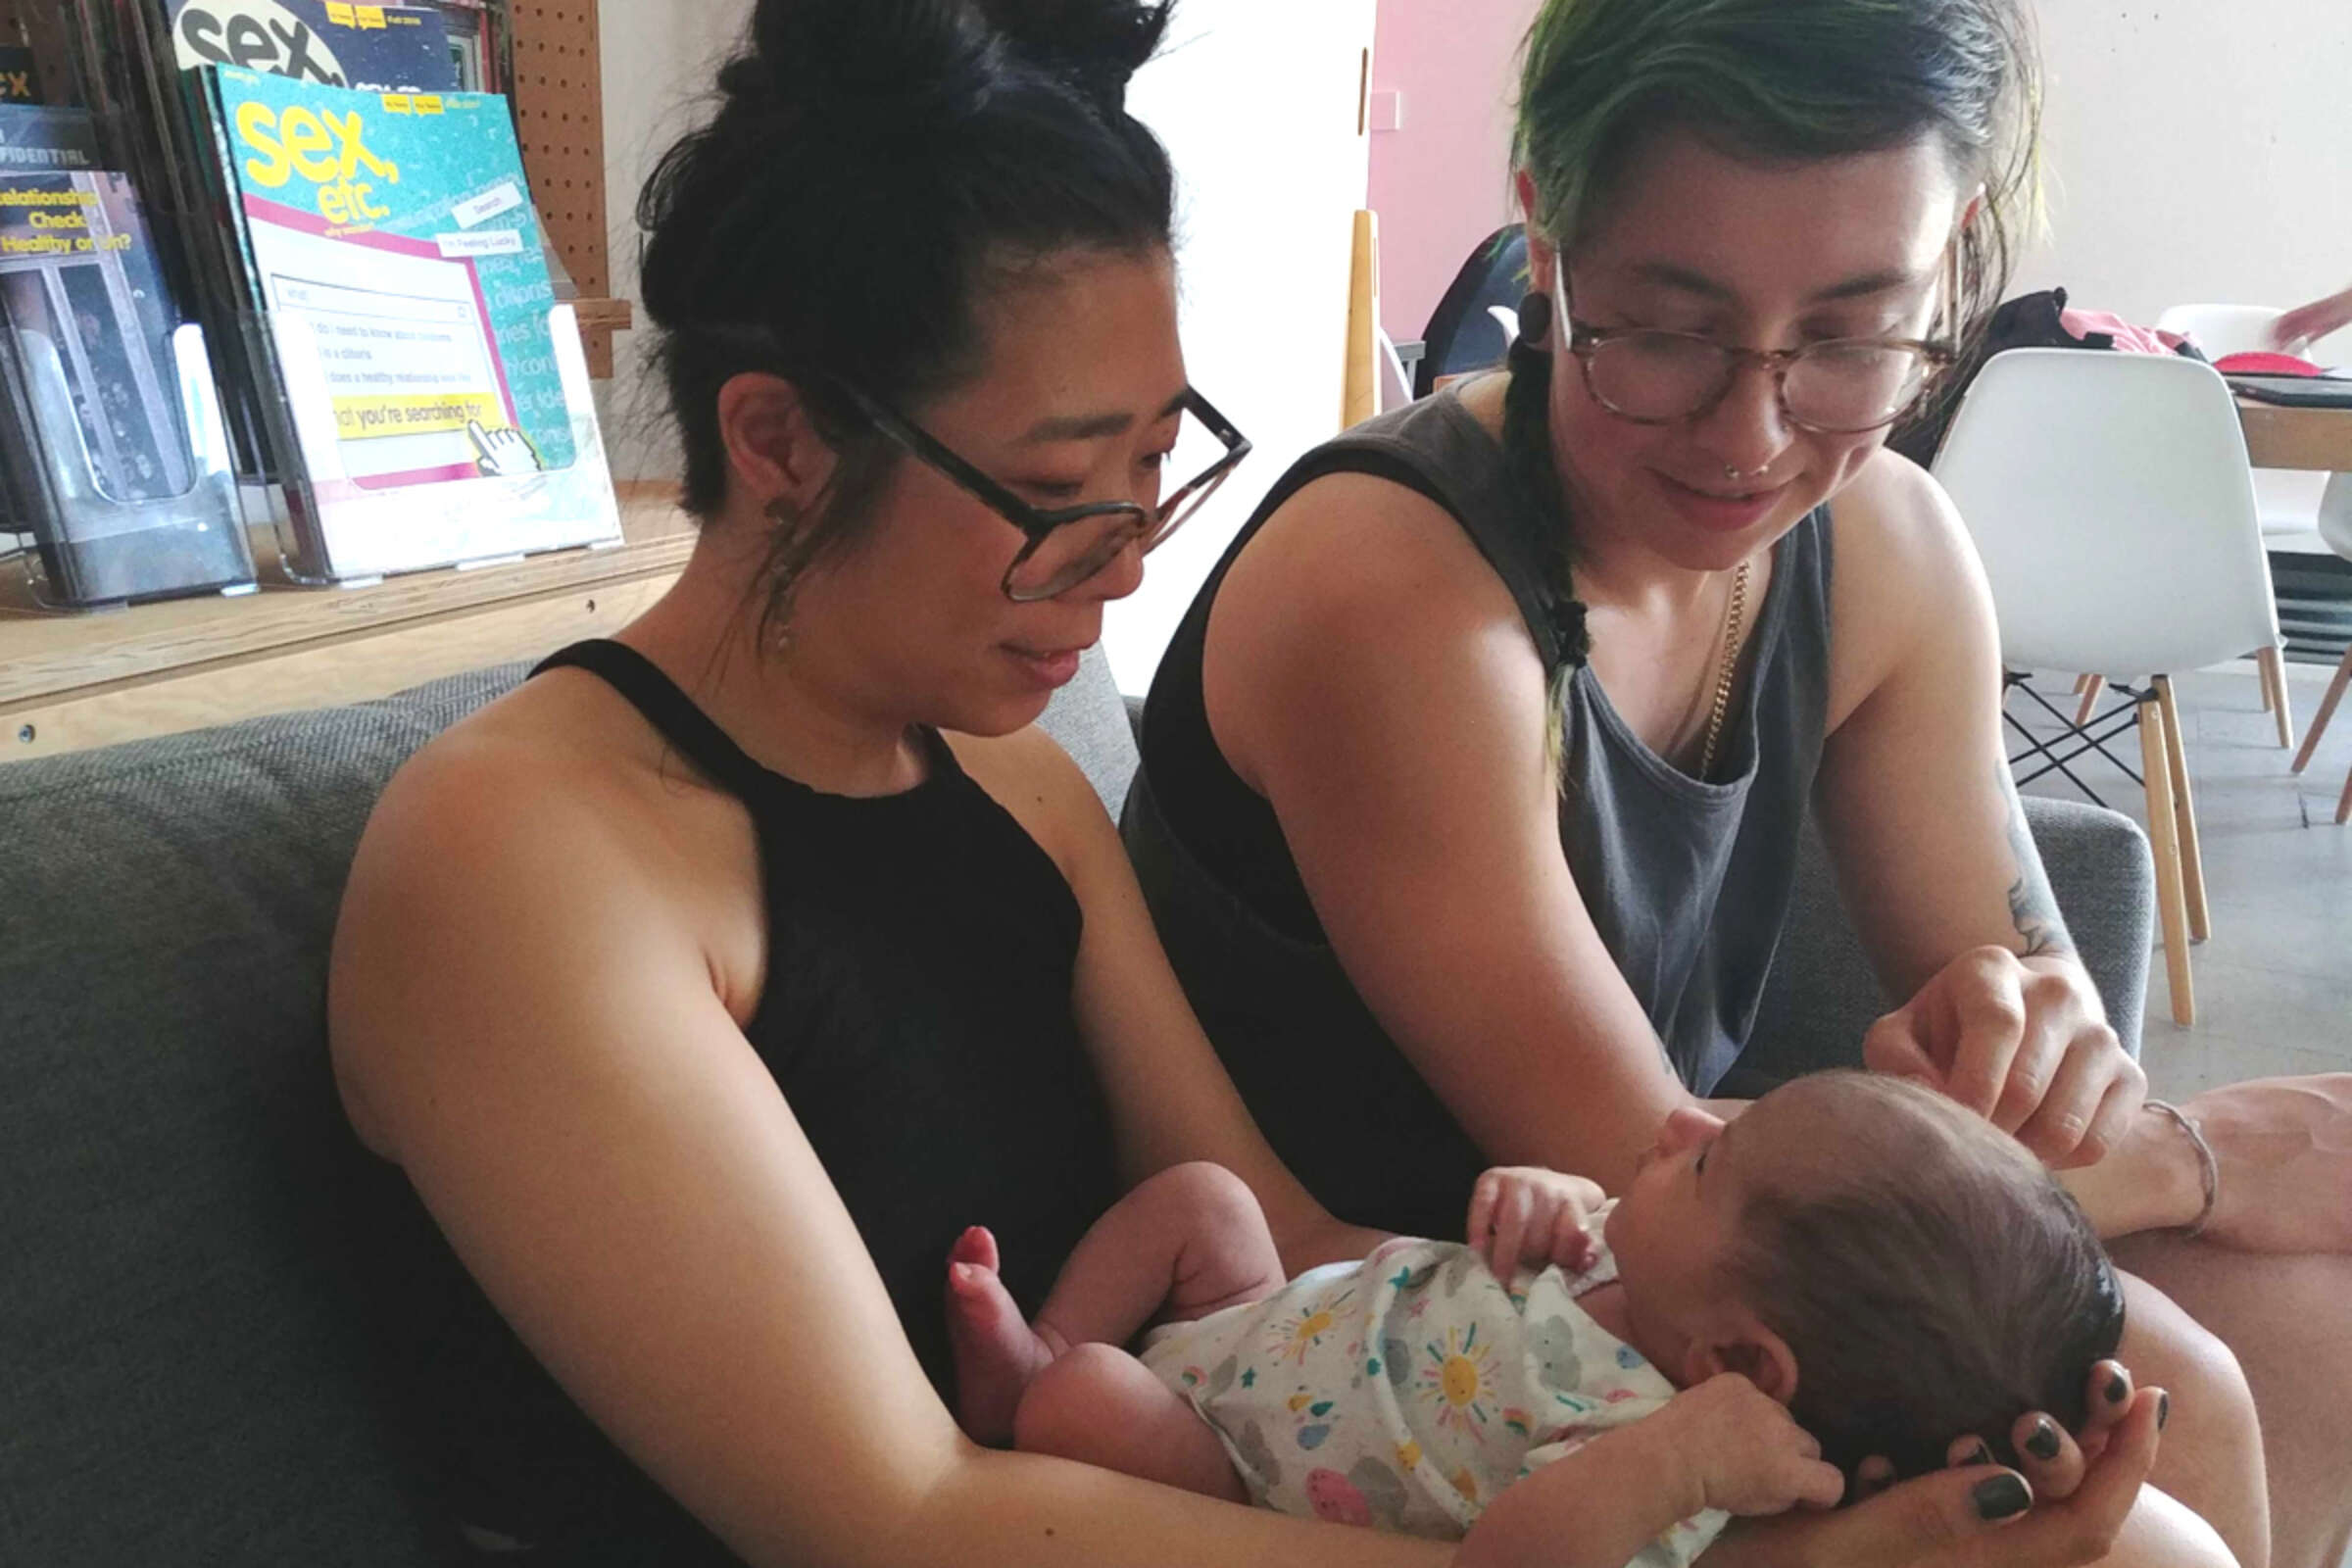 Two adults with glasses are sitting on a couch, lovingly looking at a baby they're holding. The person on the left in a black tank top cradles the baby, while the person on the right in a gray top gently touches the baby's head. Shelves with magazines are in the background.